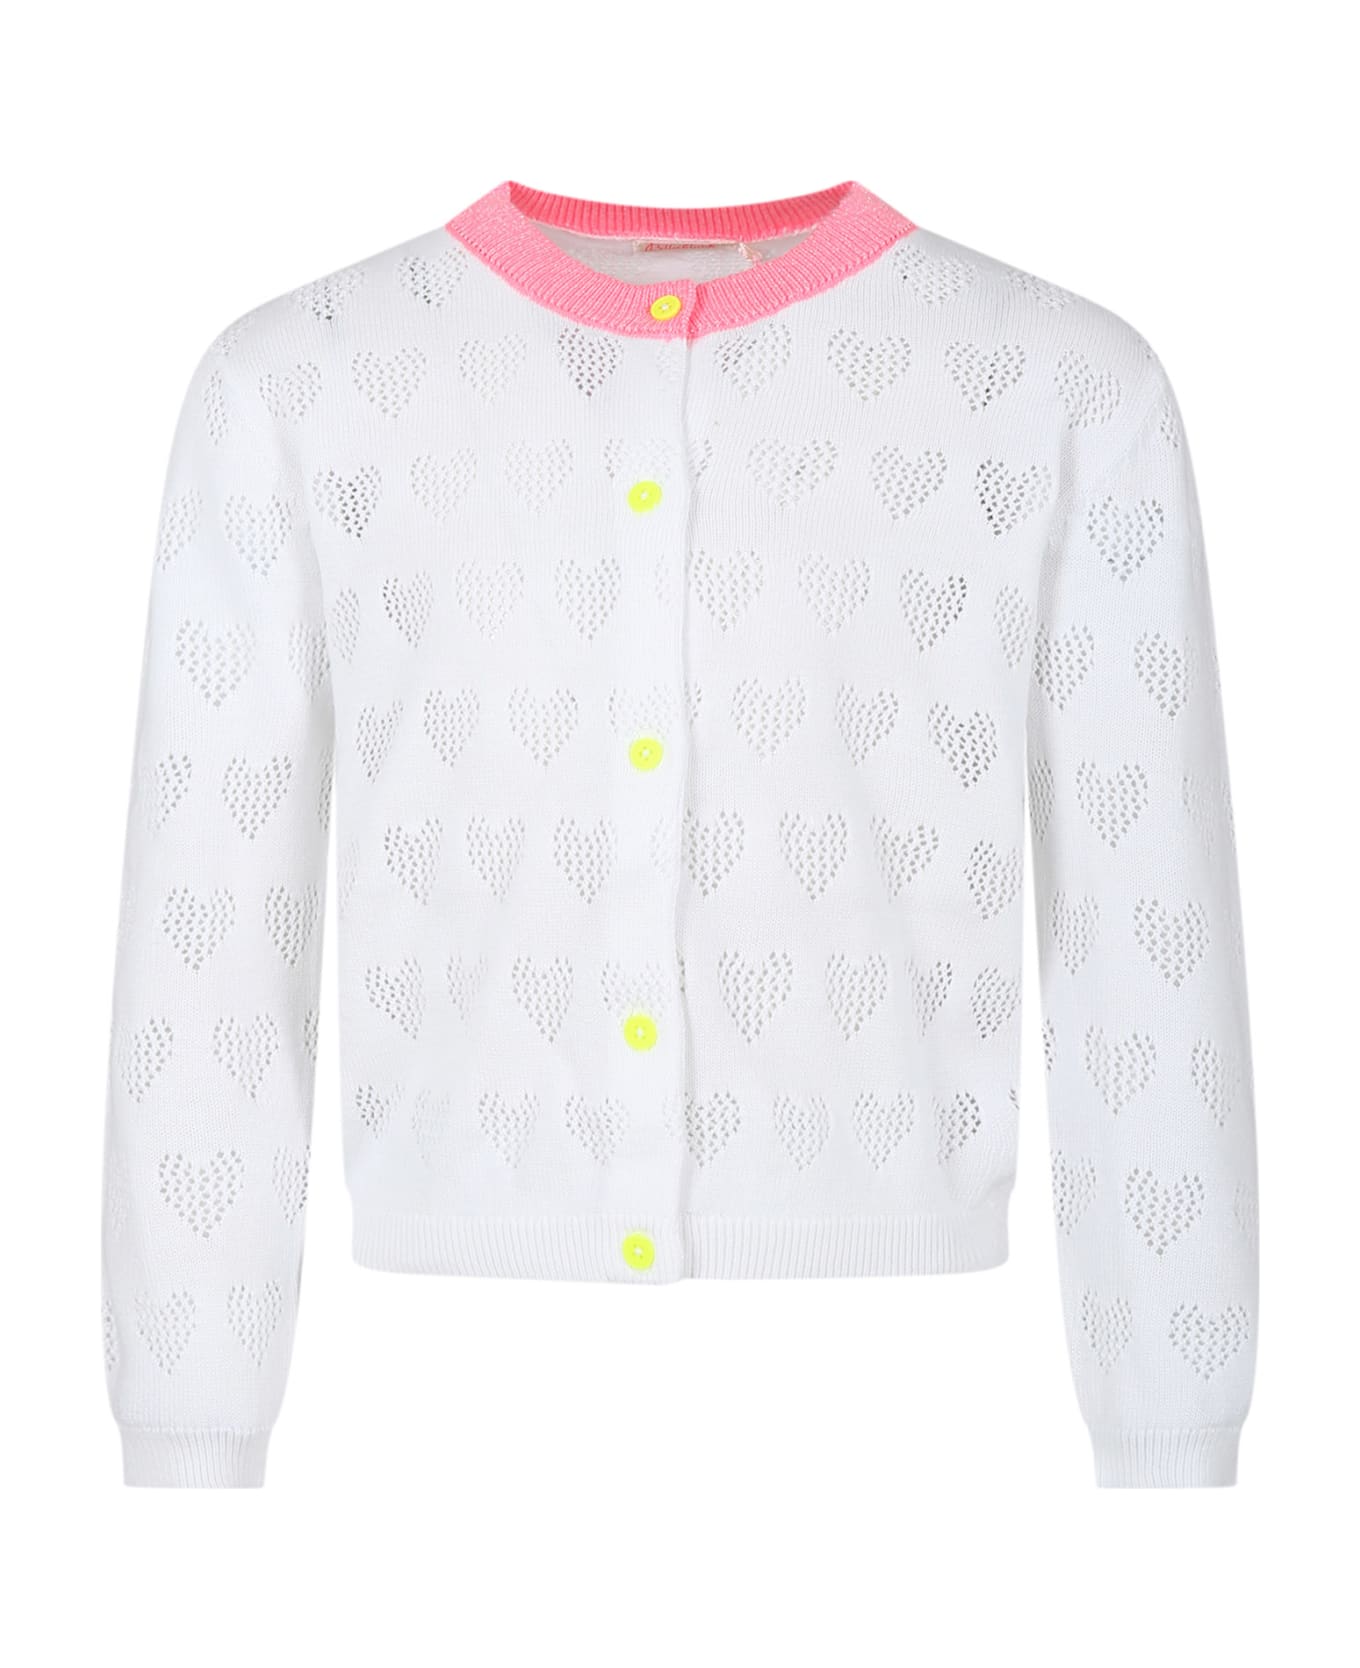 Billieblush White Cardigan For Girl With Hearts - White